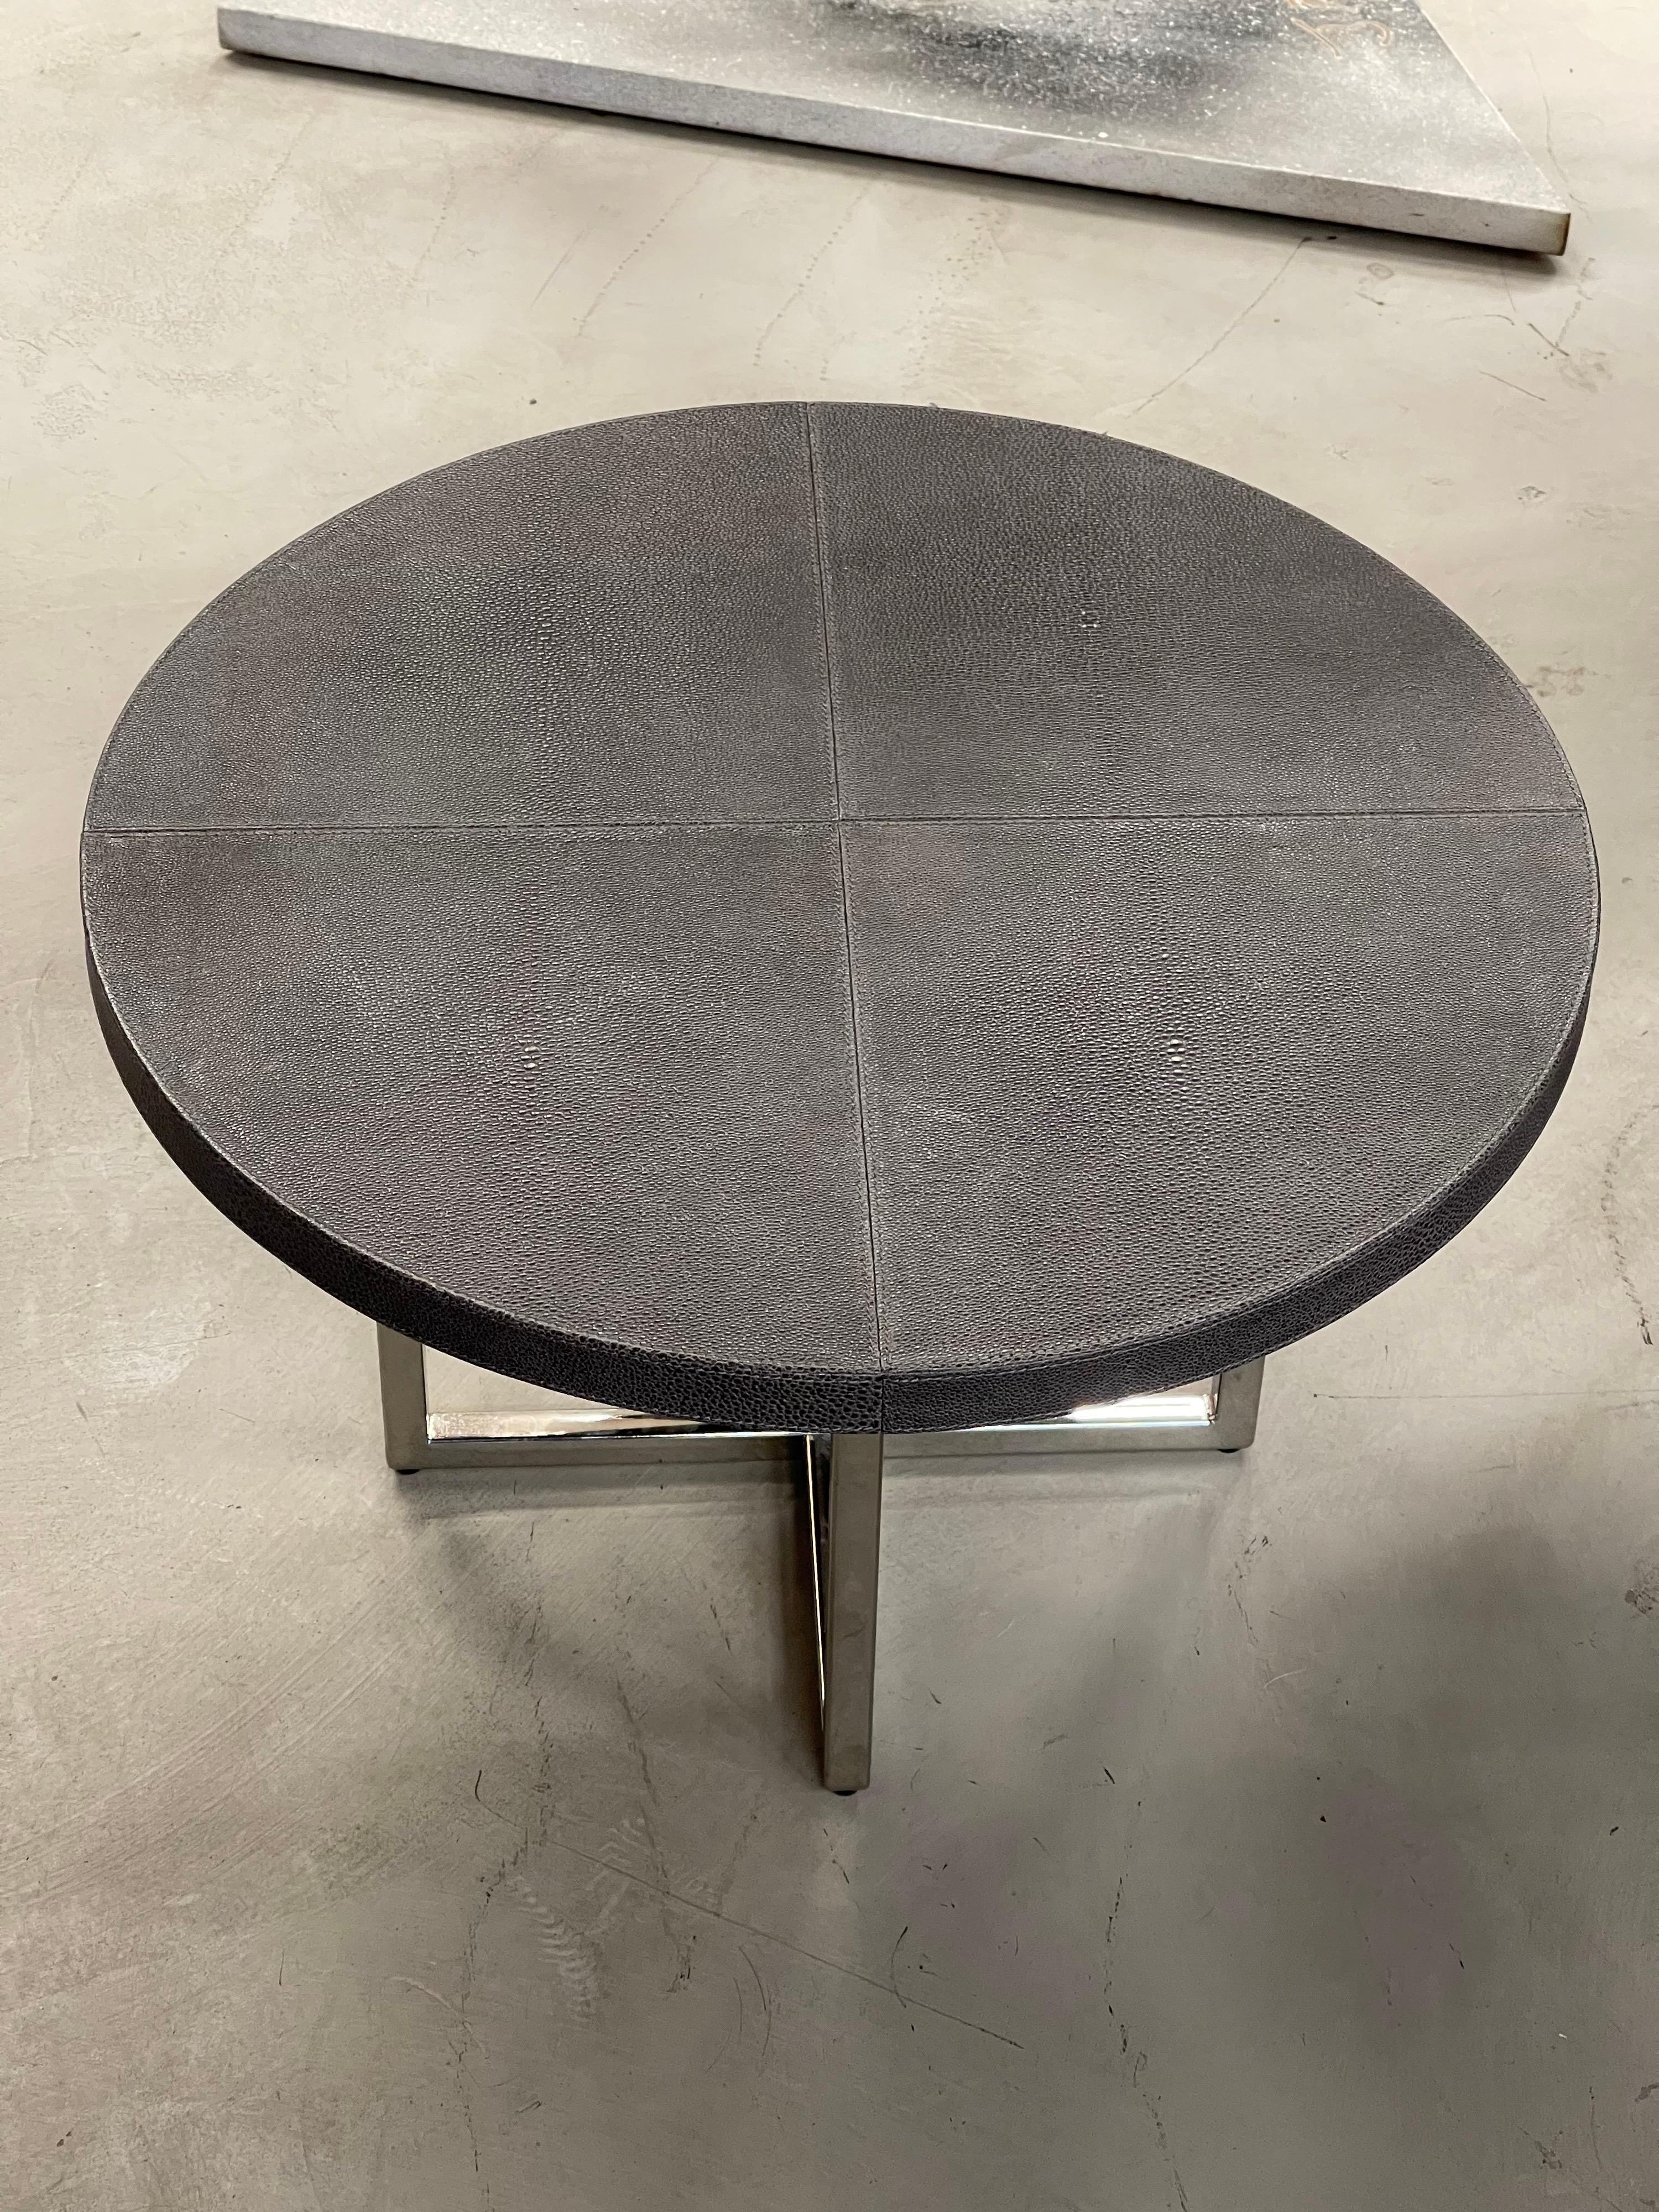 Fendi Casa Shagreen Leather Top Table For Sale 2